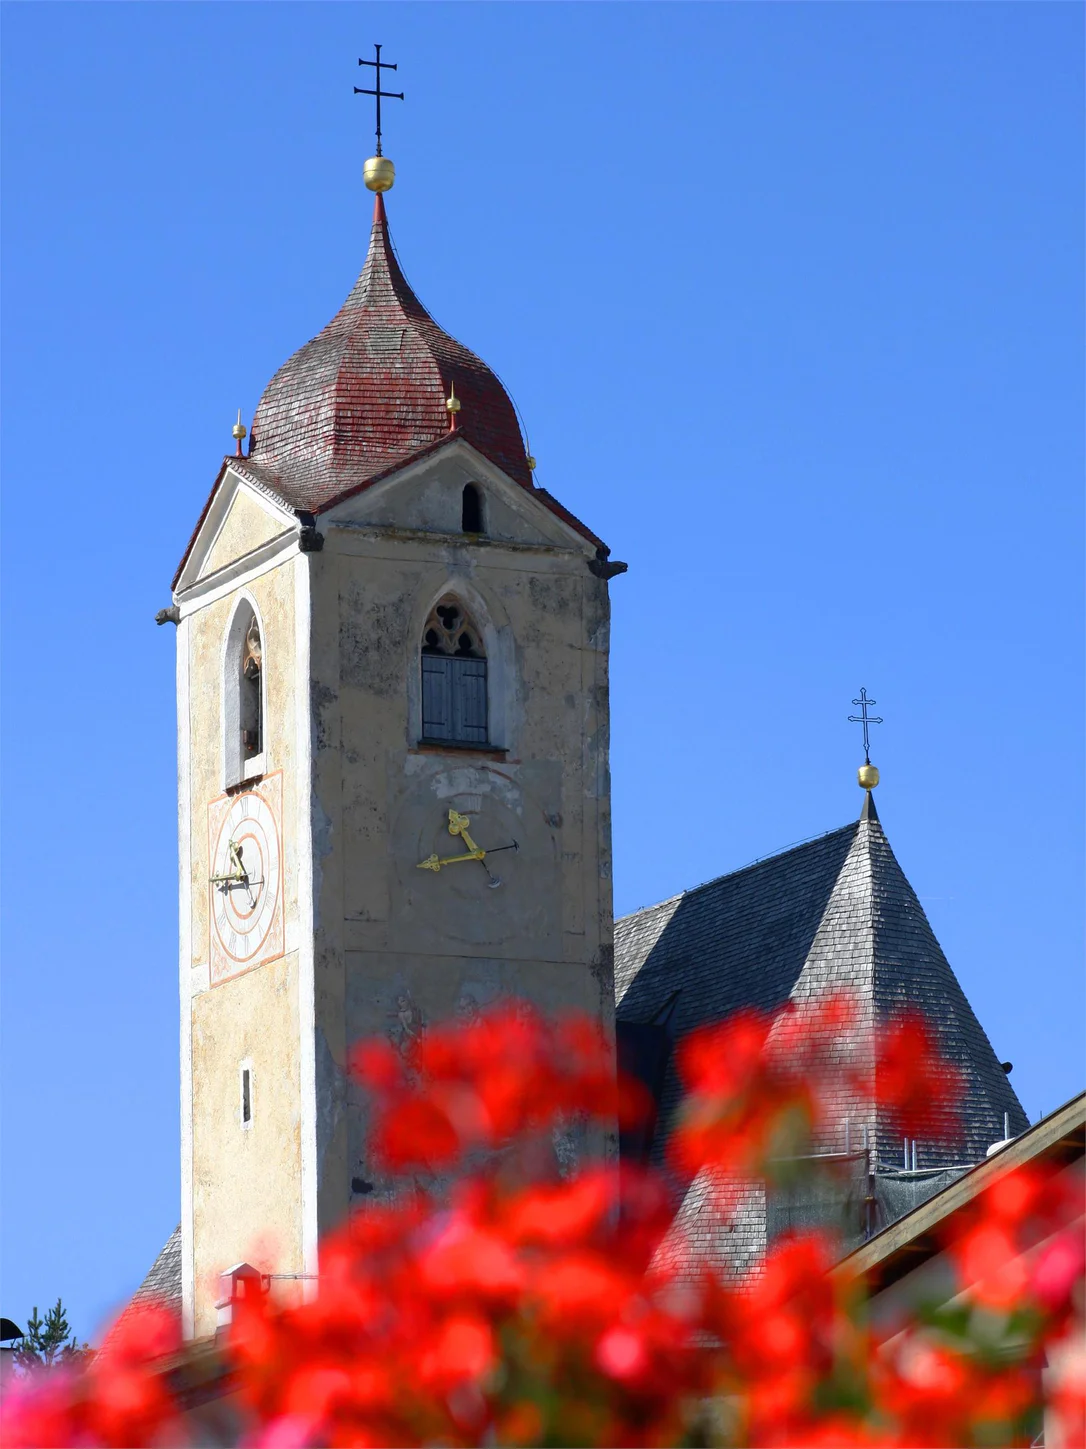 The Church of Our Lady in Lajen/Laion